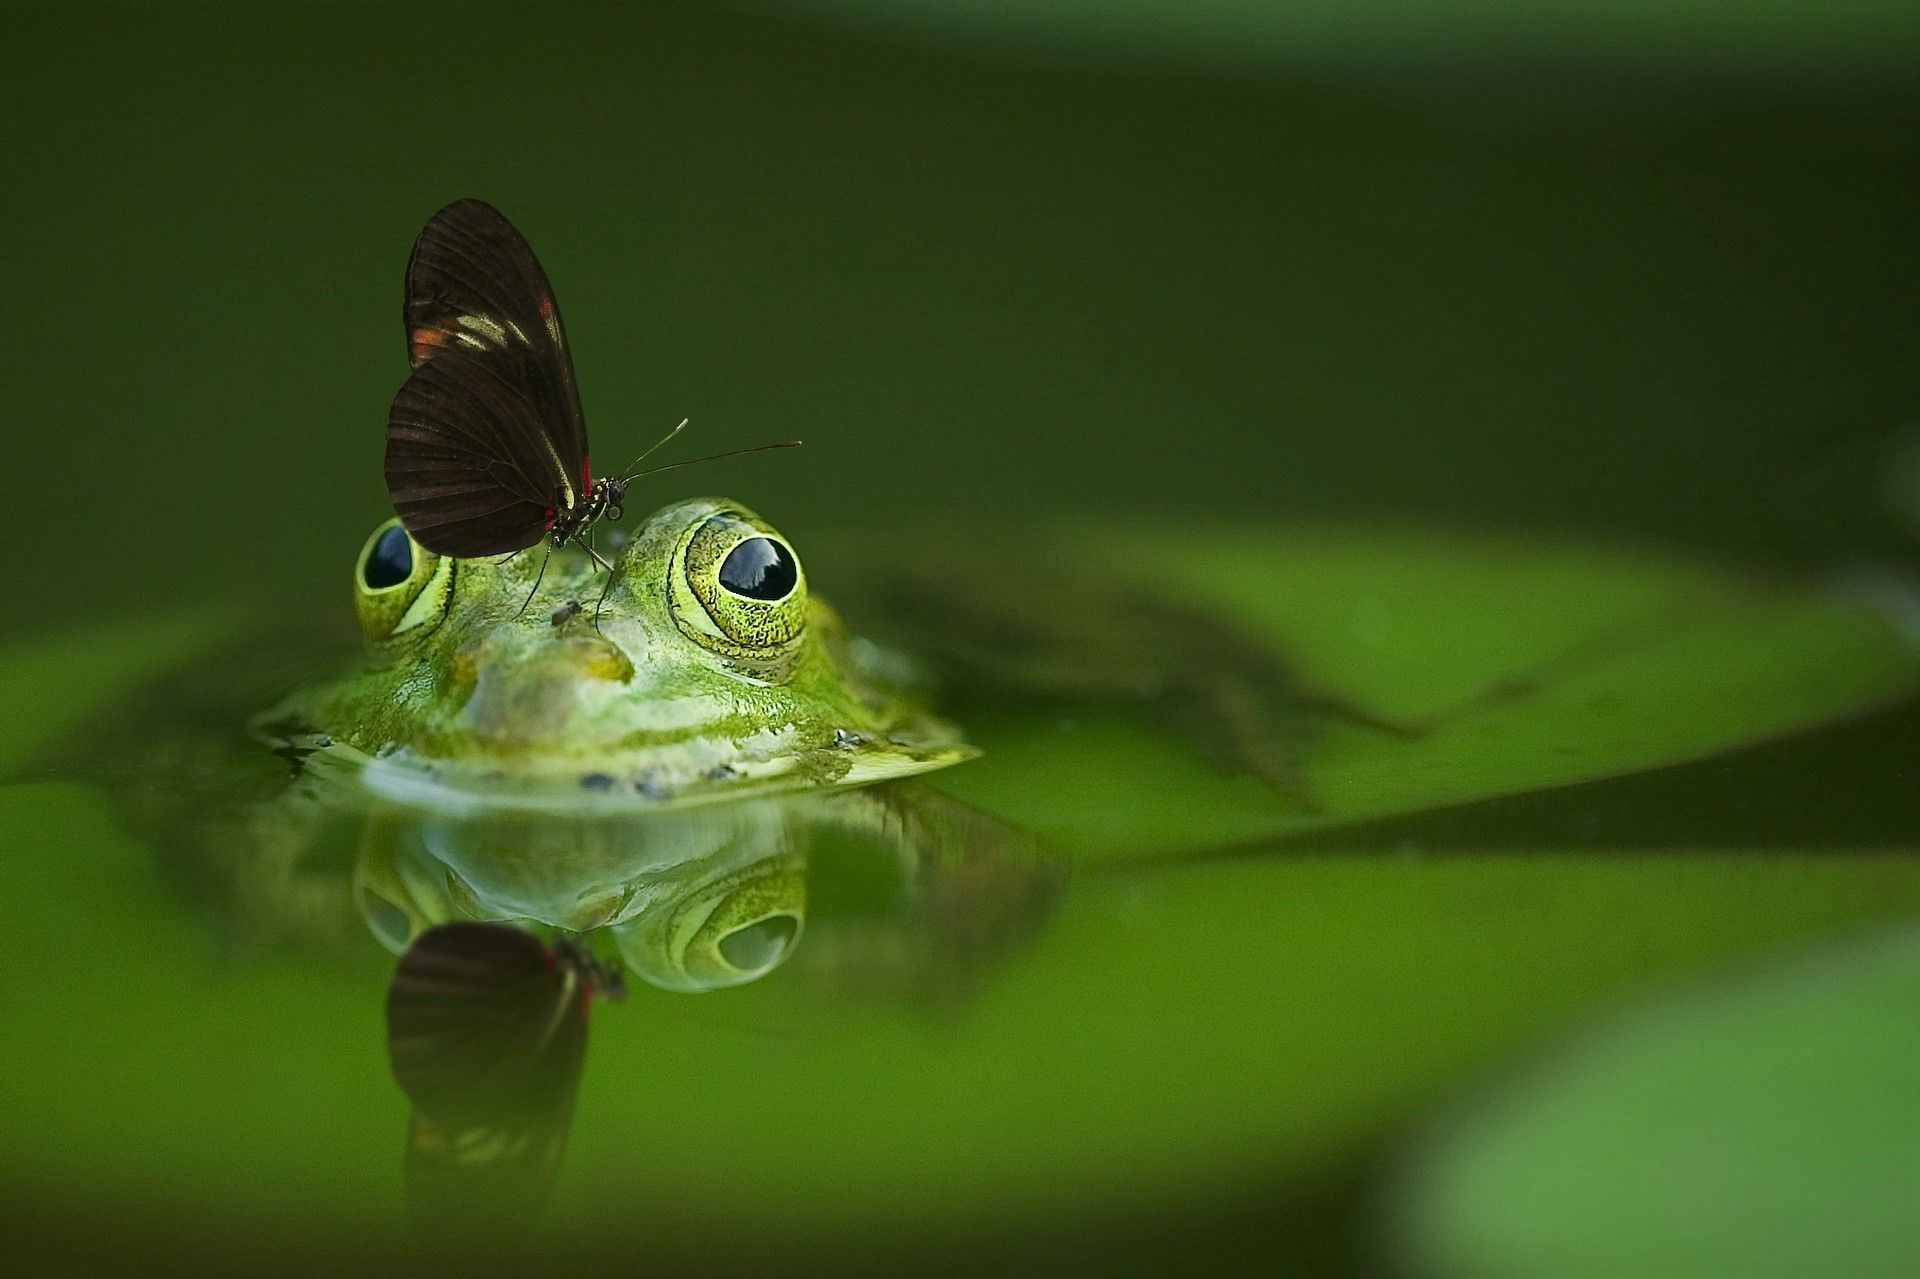 A green frog with a butterfly on its head - Frog